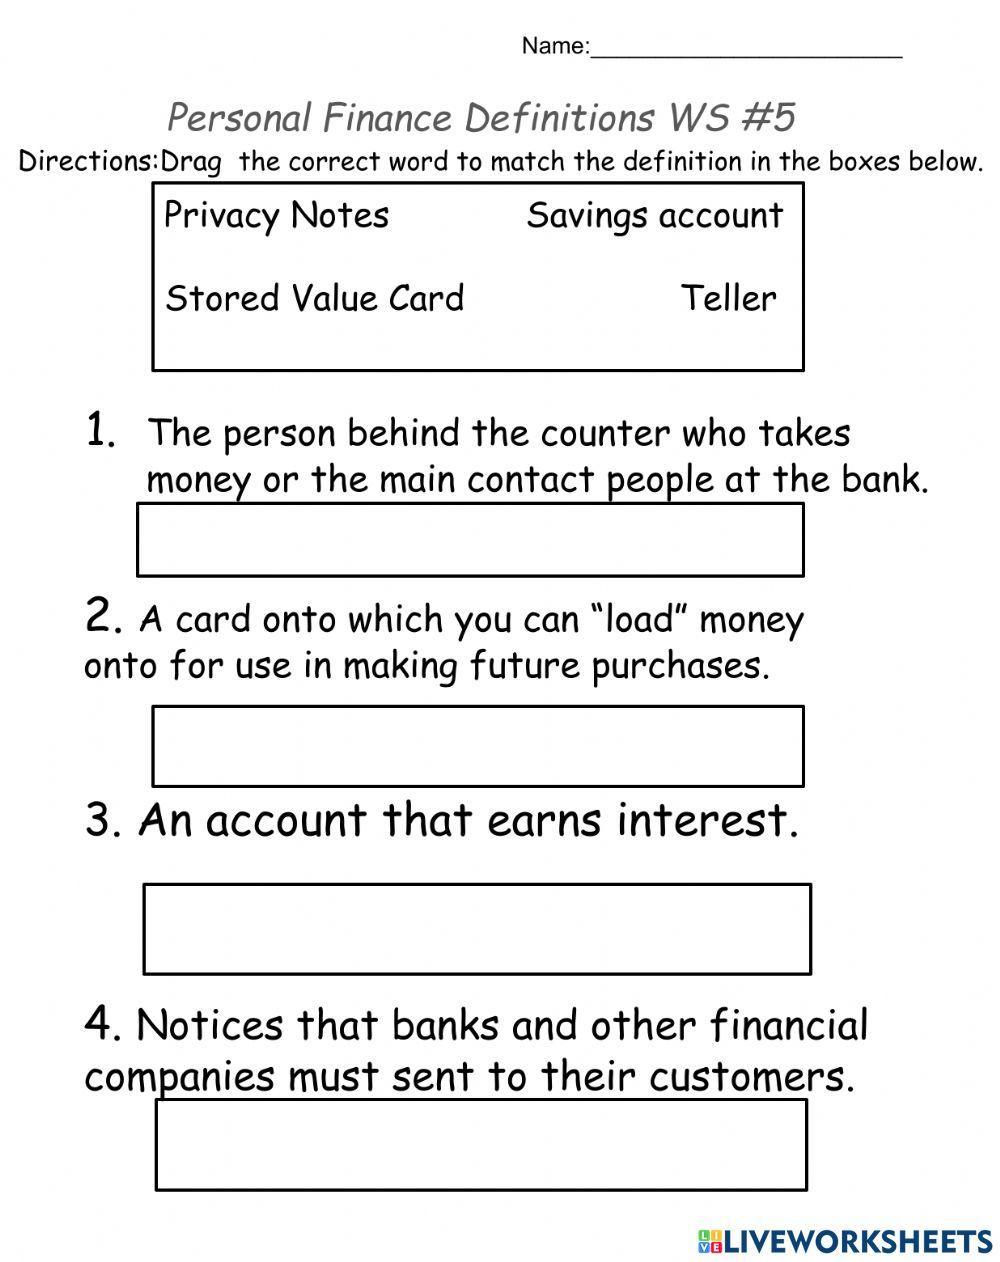 Personal Finance - Definitions WS 5